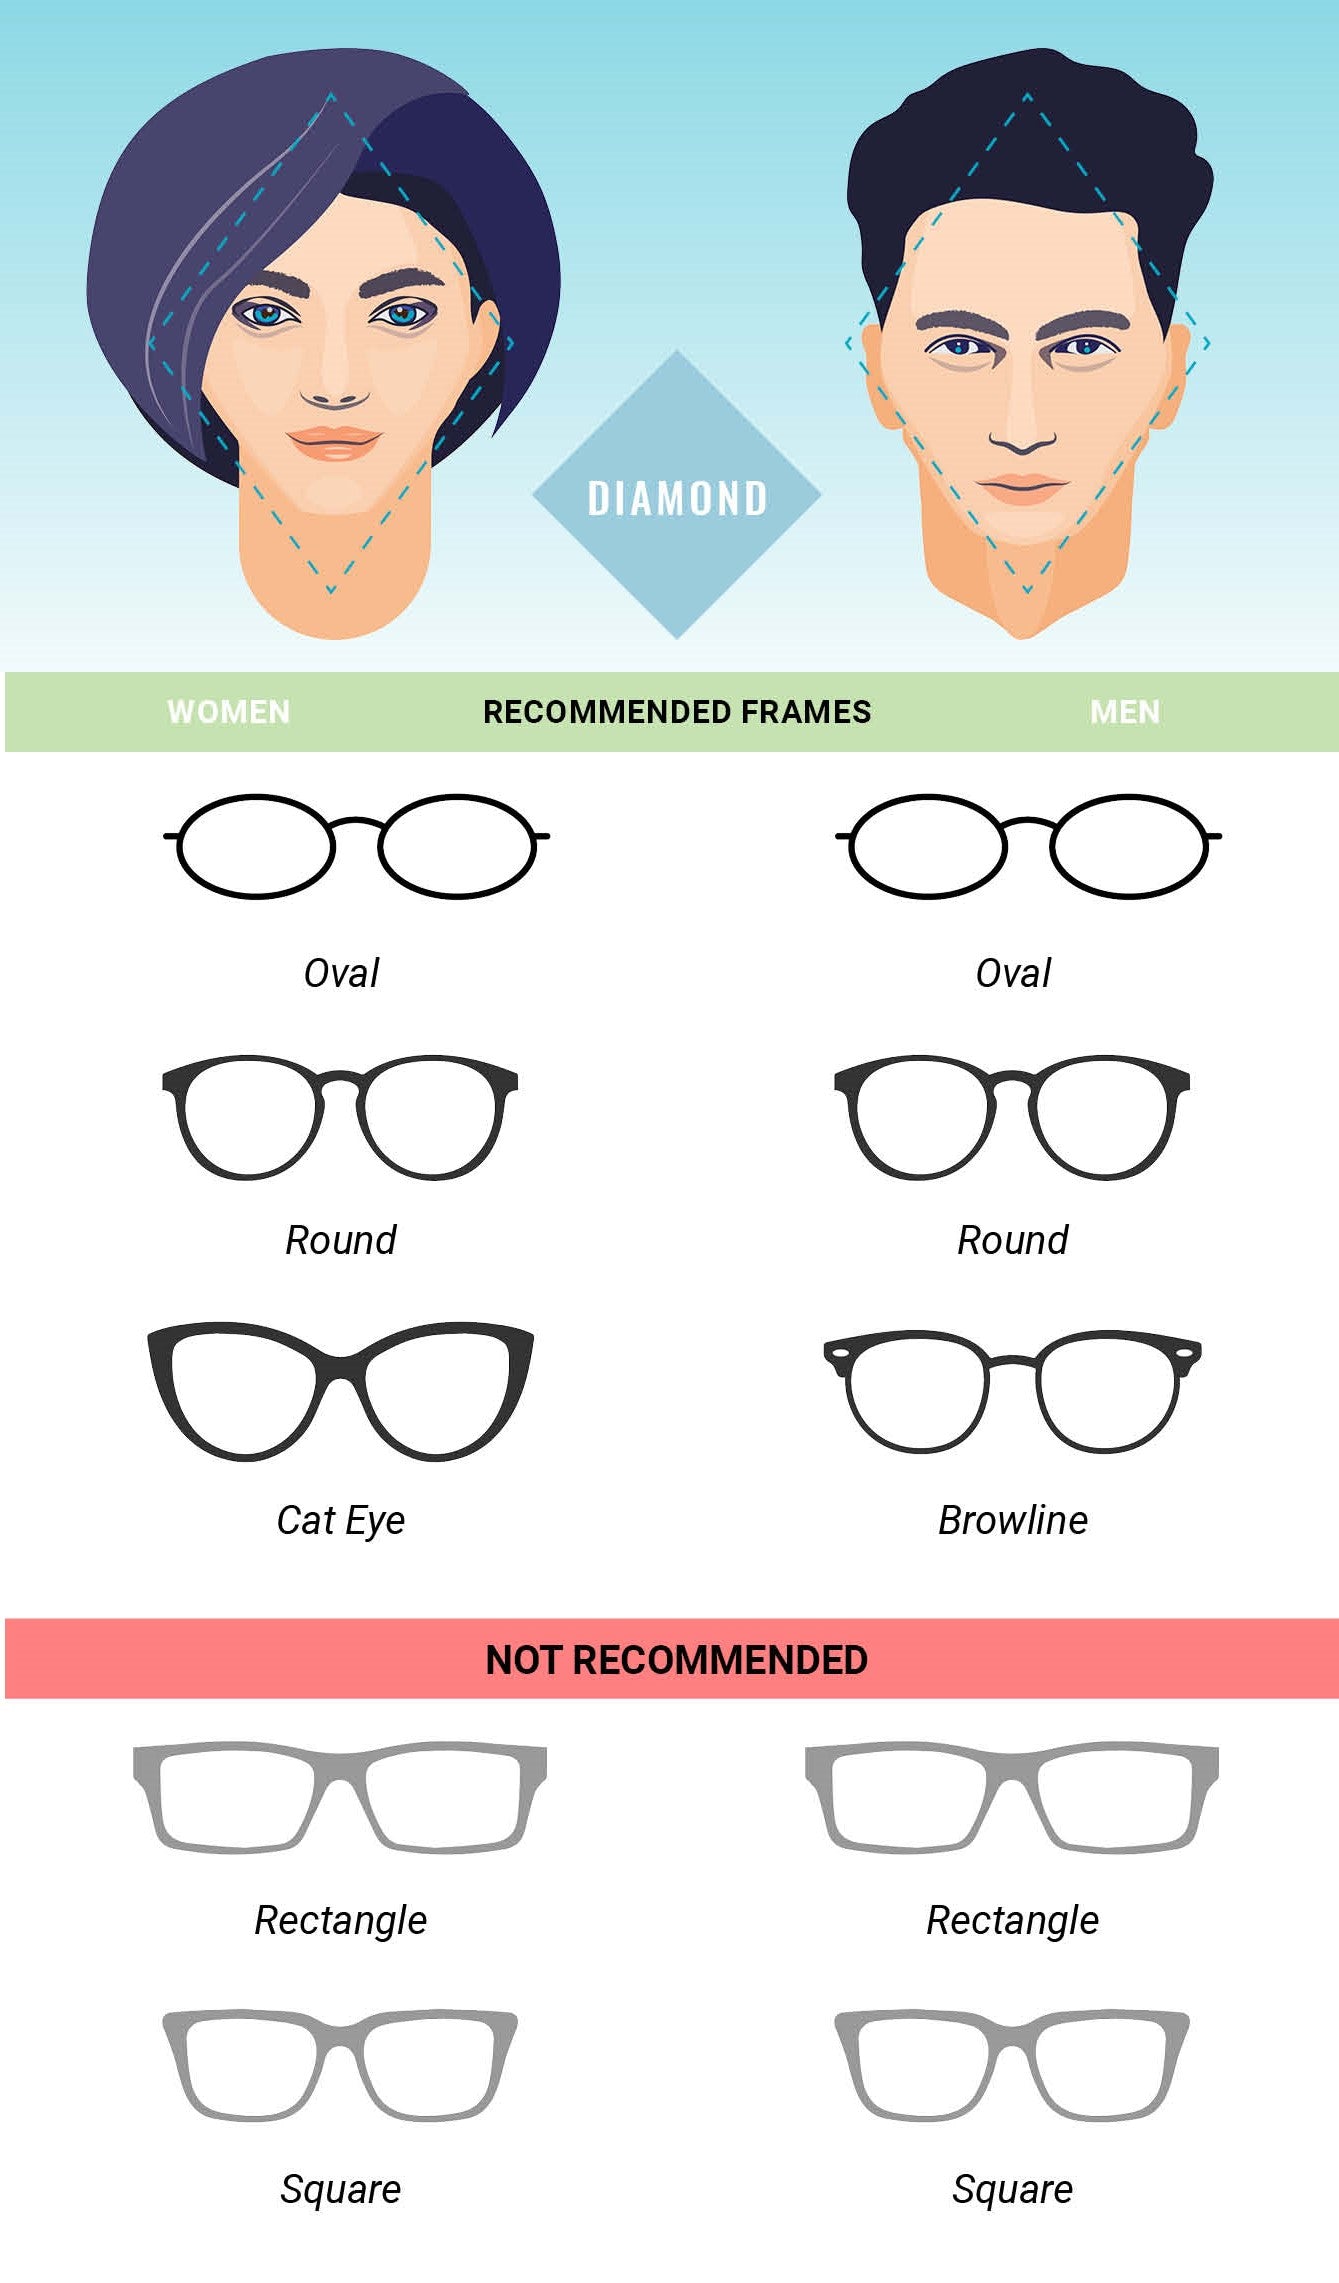 How To Find The Best Eyeglasses For Your Face Shape | Sol Optix